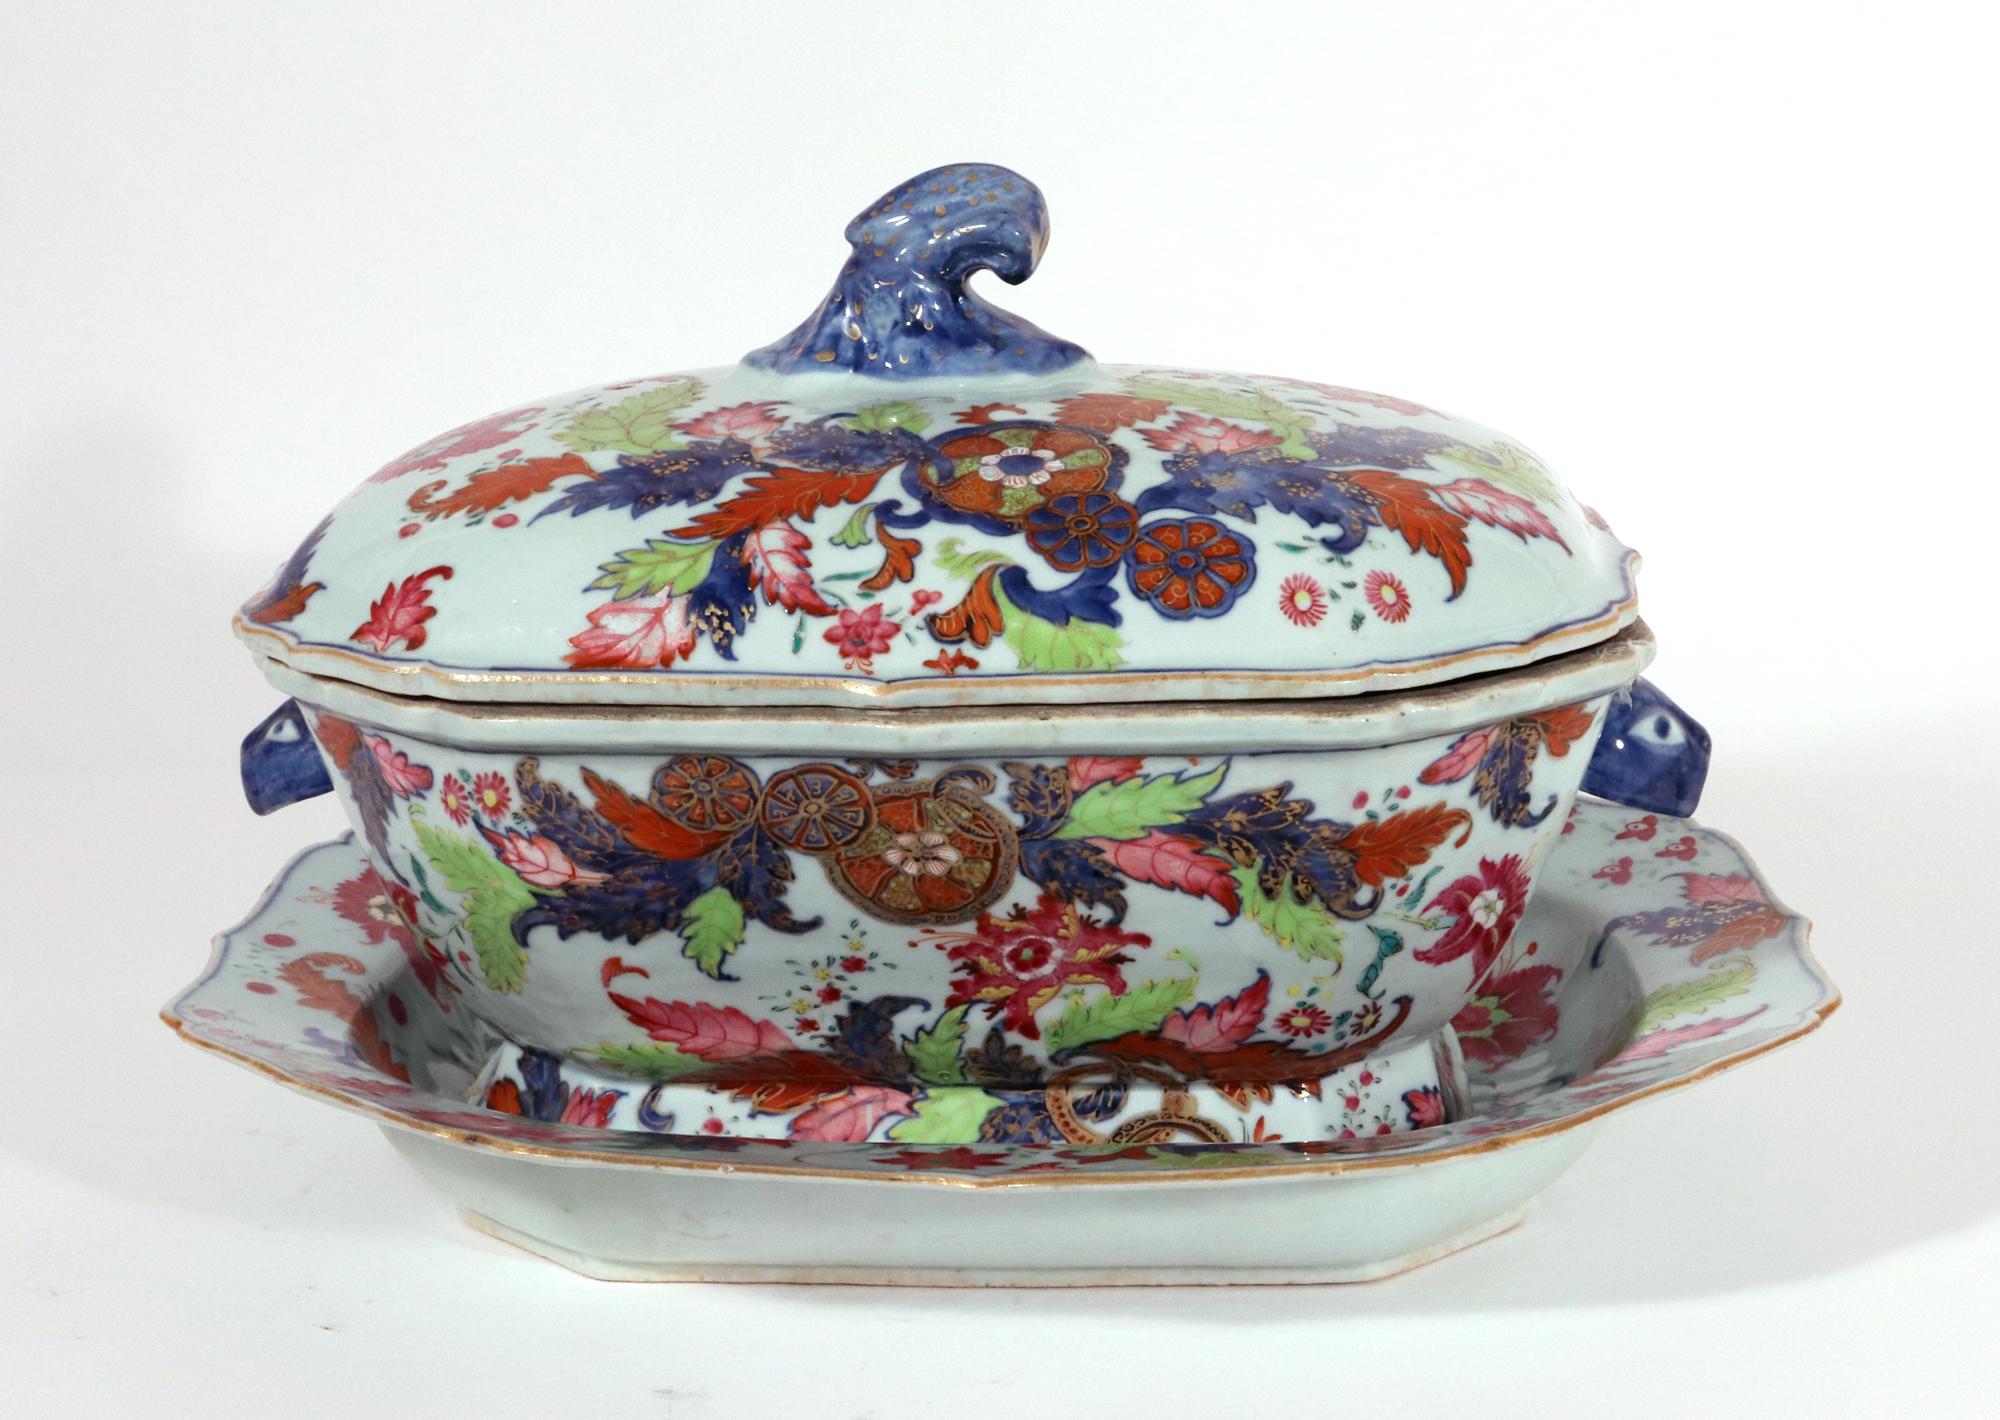 Mid-18th Century Chinese Export Porcelain Pseudo Tobacco Leaf Soup Tureen, Cover, and Stand